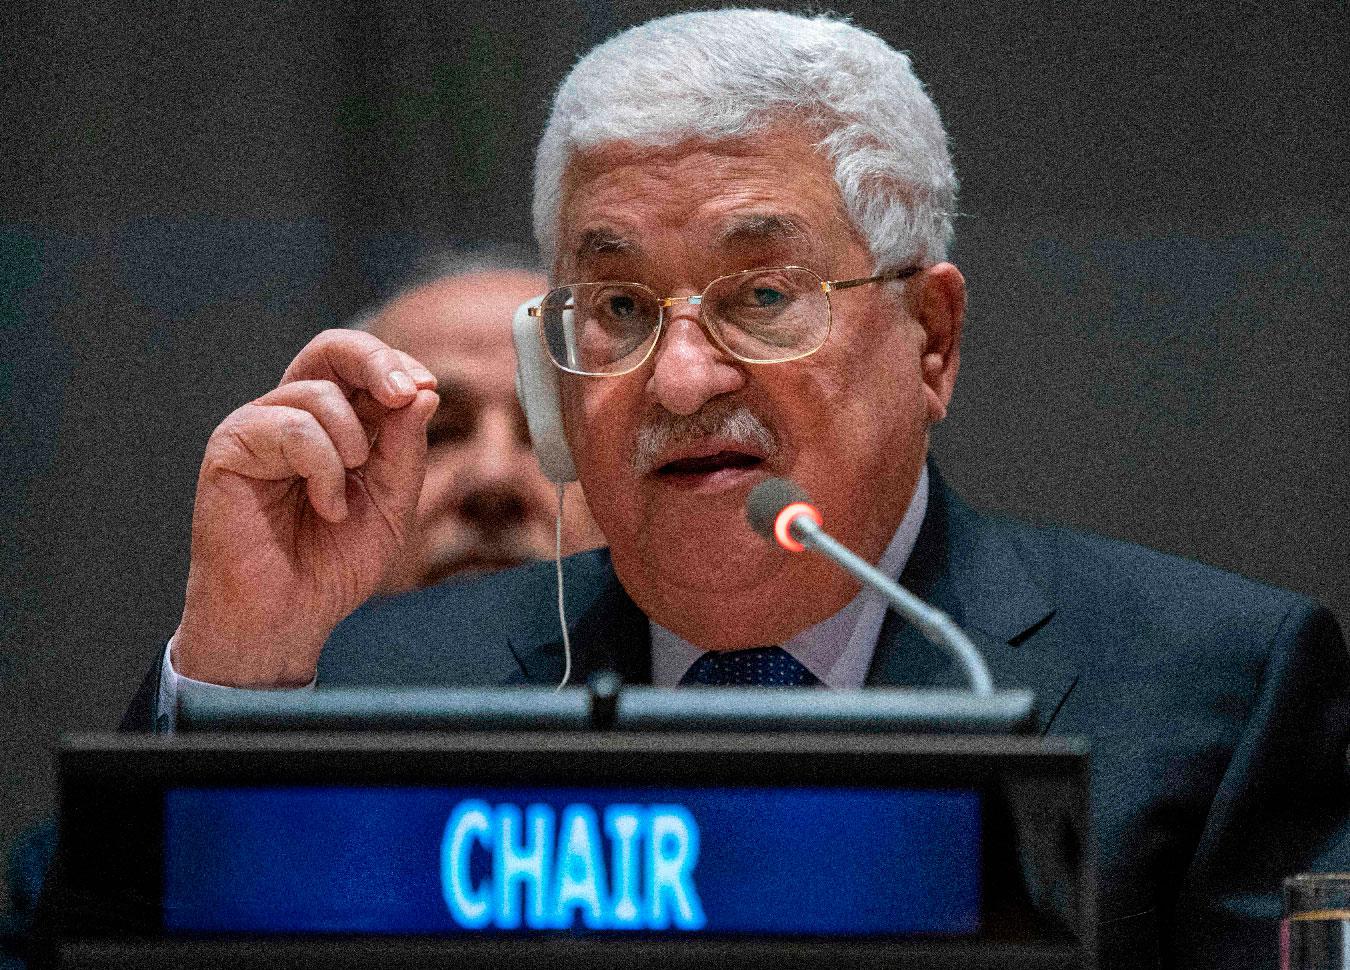 Palestinian president Mahmud Abbas addresses the United Nations Group of 77 and China January 15, 2019 at the United Nations in New York.